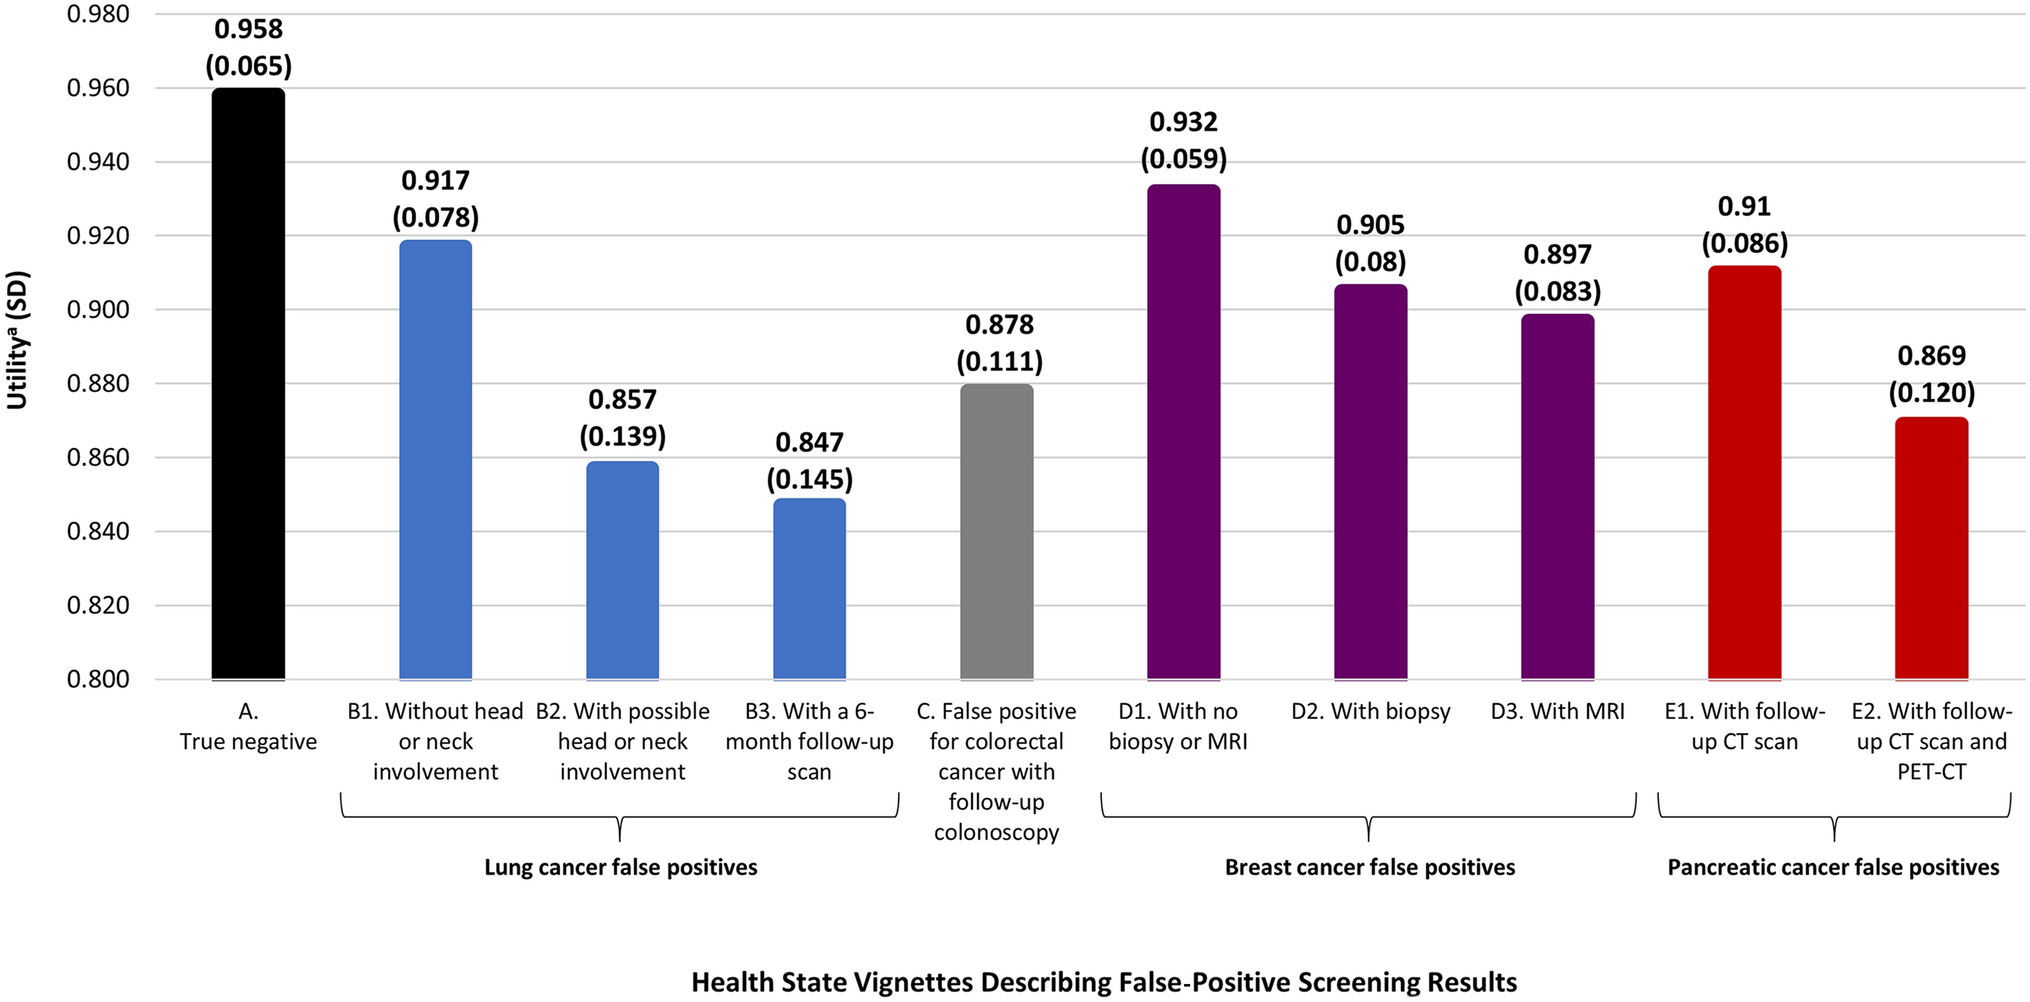 Health State Utilities Associated with False-Positive Cancer Screening Results